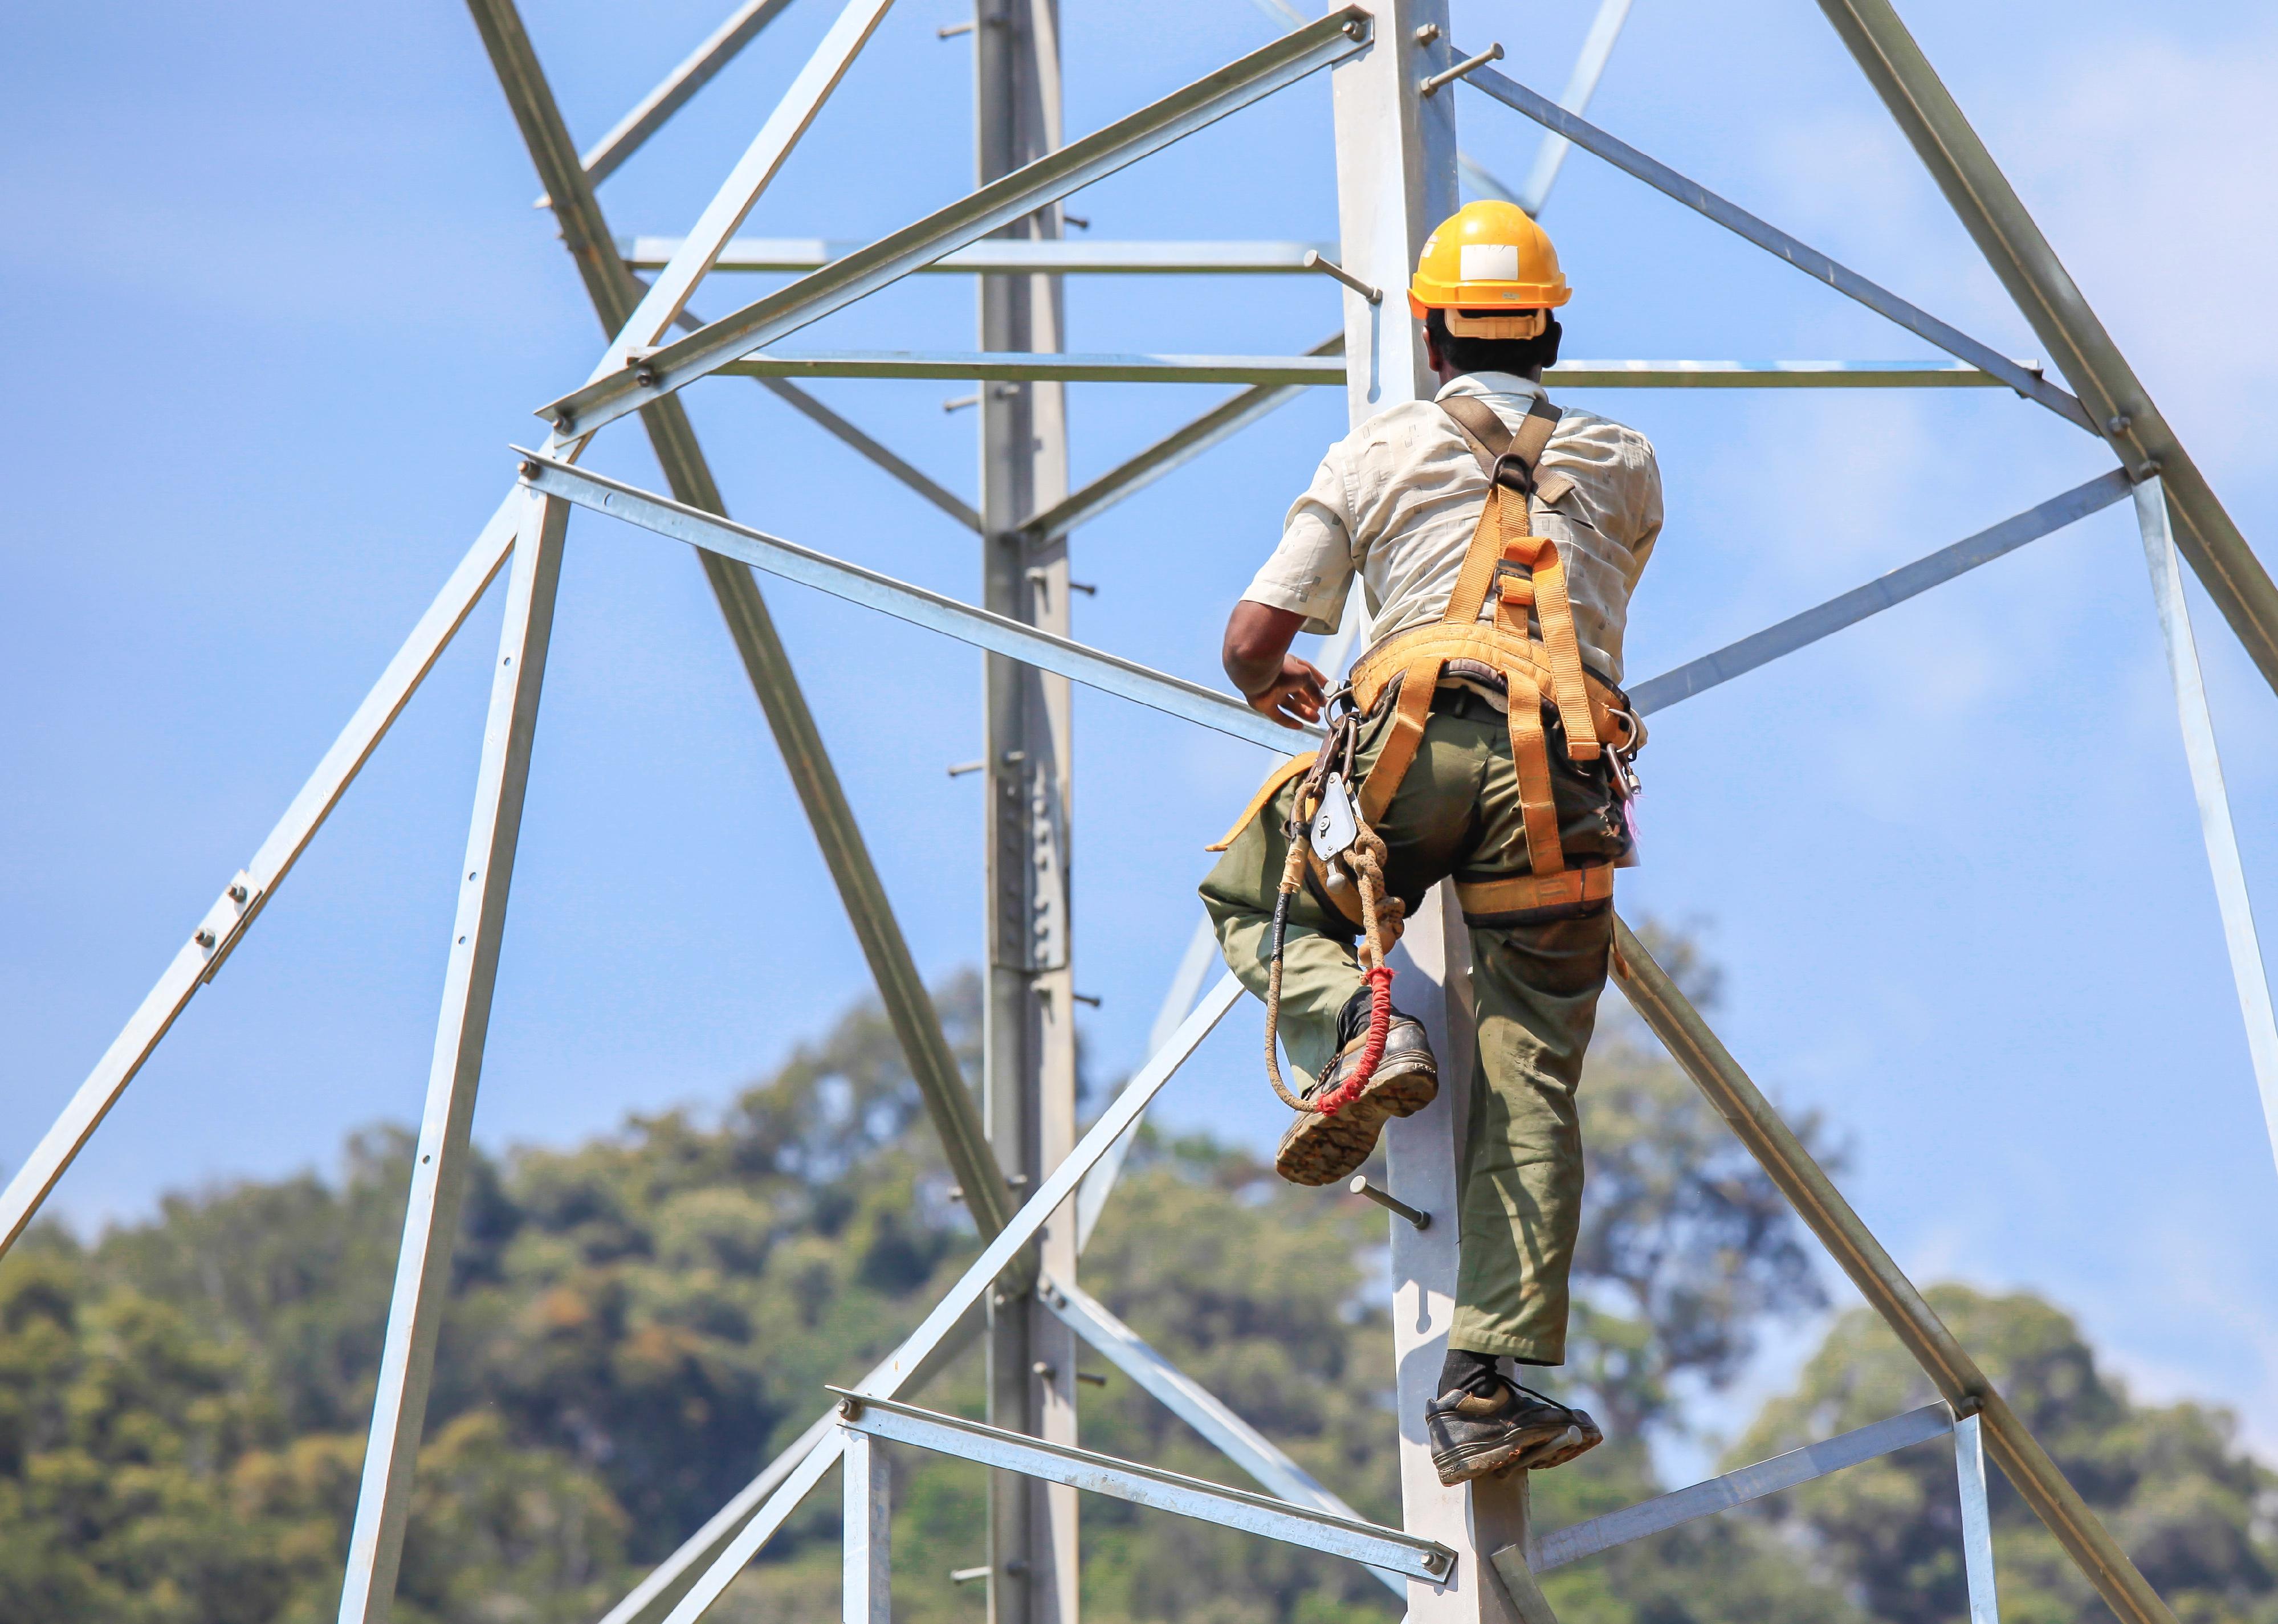 Worker climbing on transmission line tower.